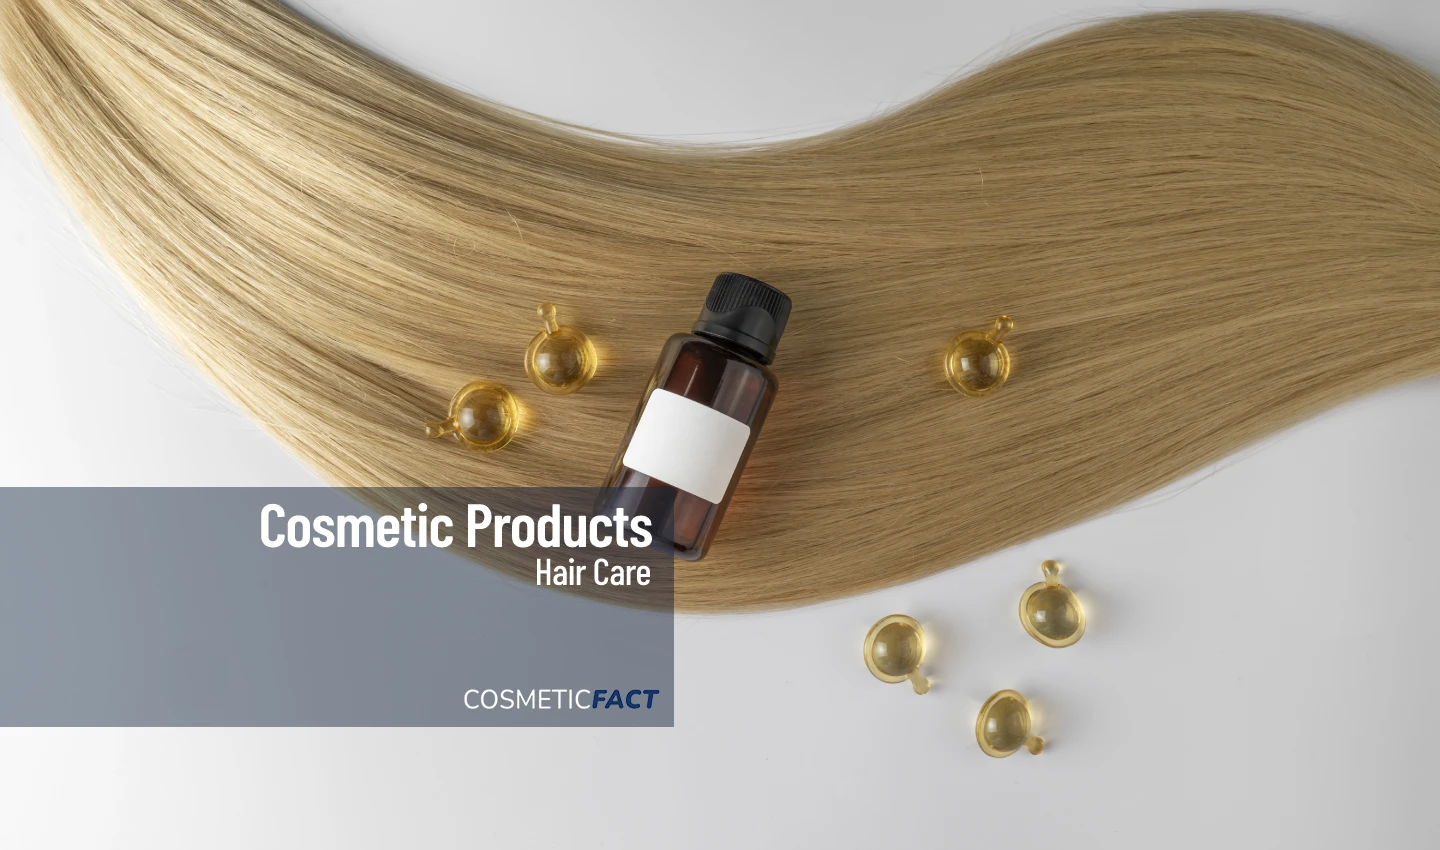 A blonde lock of hair is showcased with hair supplements and a bottle of hair oil, emphasizing the importance of natural ingredients in promoting healthy, beautiful hair.